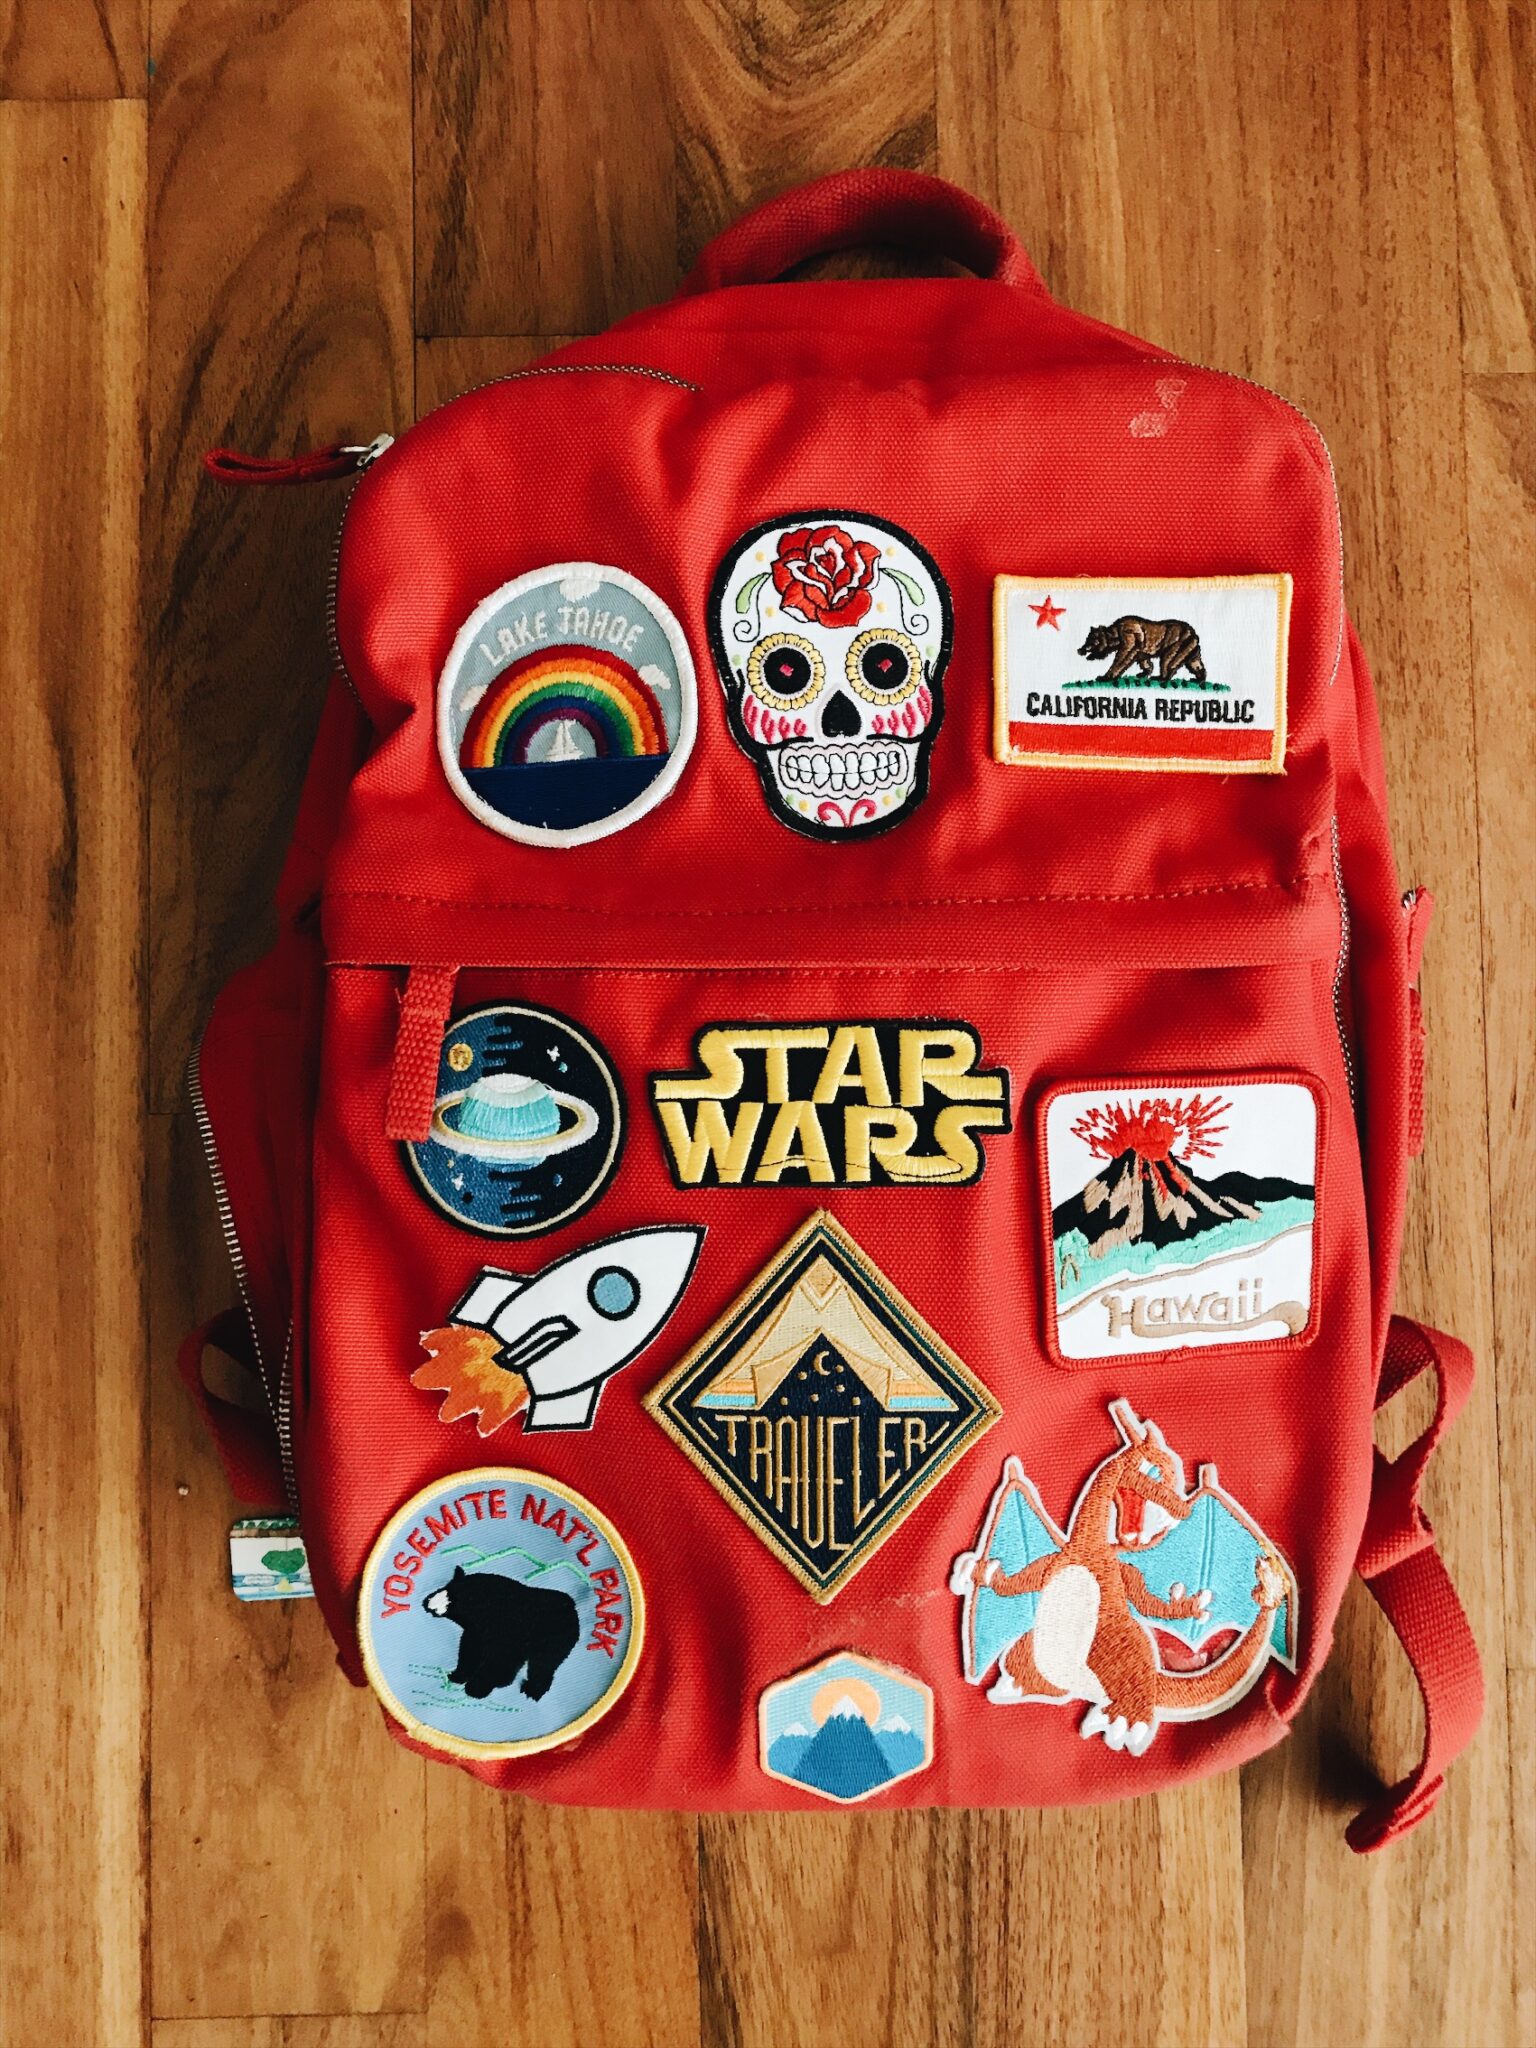 Patches Small Canvas Backpack